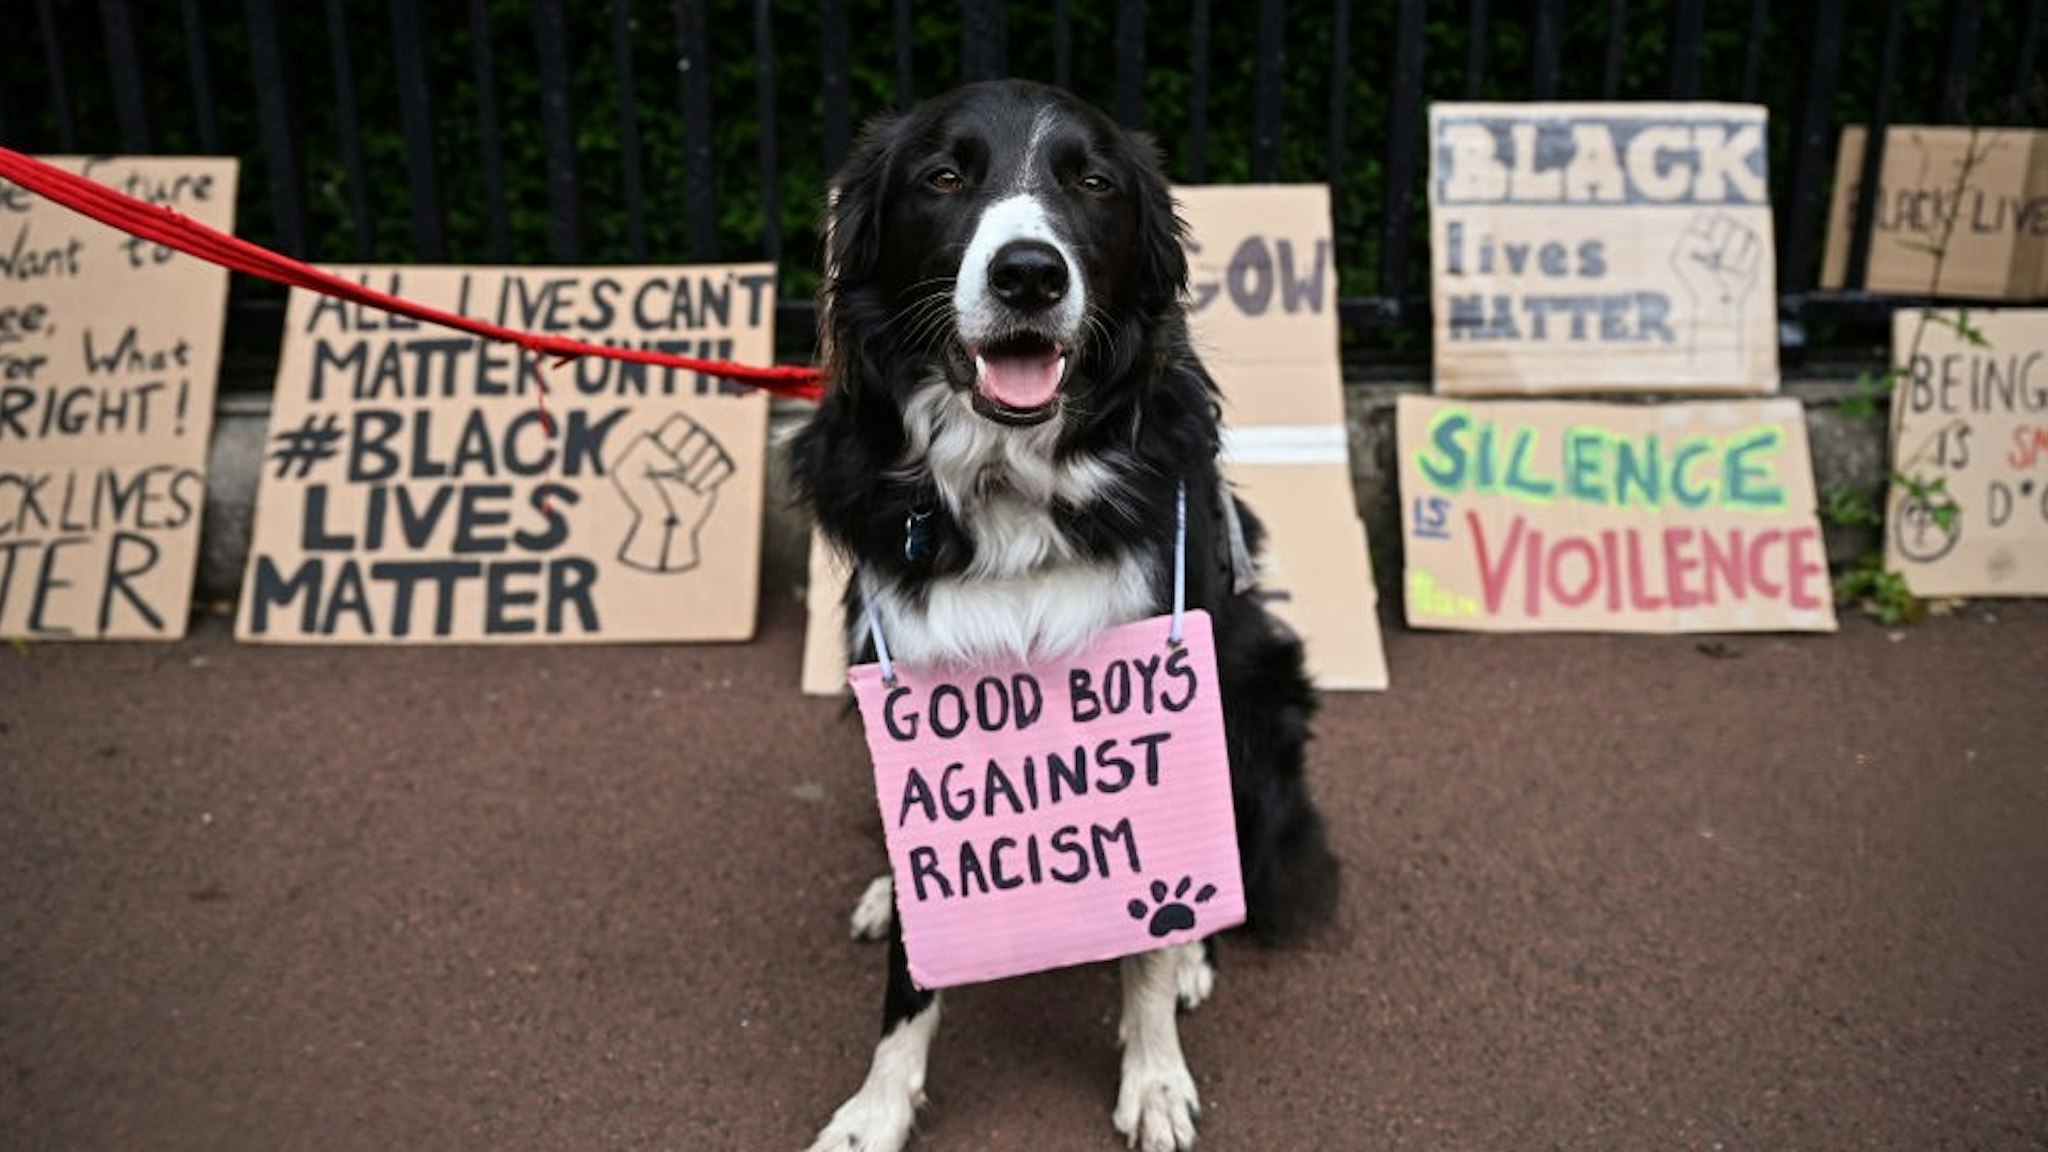 EDINBURGH, SCOTLAND - JUNE 07: A dog wears a sign saying "Good boys against racism" as Black Lives Matter protesters hang their banners on the fence of Holyrood Palace, despite a call by First Minister, Nicola Sturgeon and others to find other forms of protest because of lockdown rules and coronavirus fears on June 7, 2020 in Edinburgh, Scotland.The death of an African-American man, George Floyd, while in the custody of Minneapolis police has sparked protests across the United States, as well as demonstrations of solidarity in many countries around the world. (Photo by